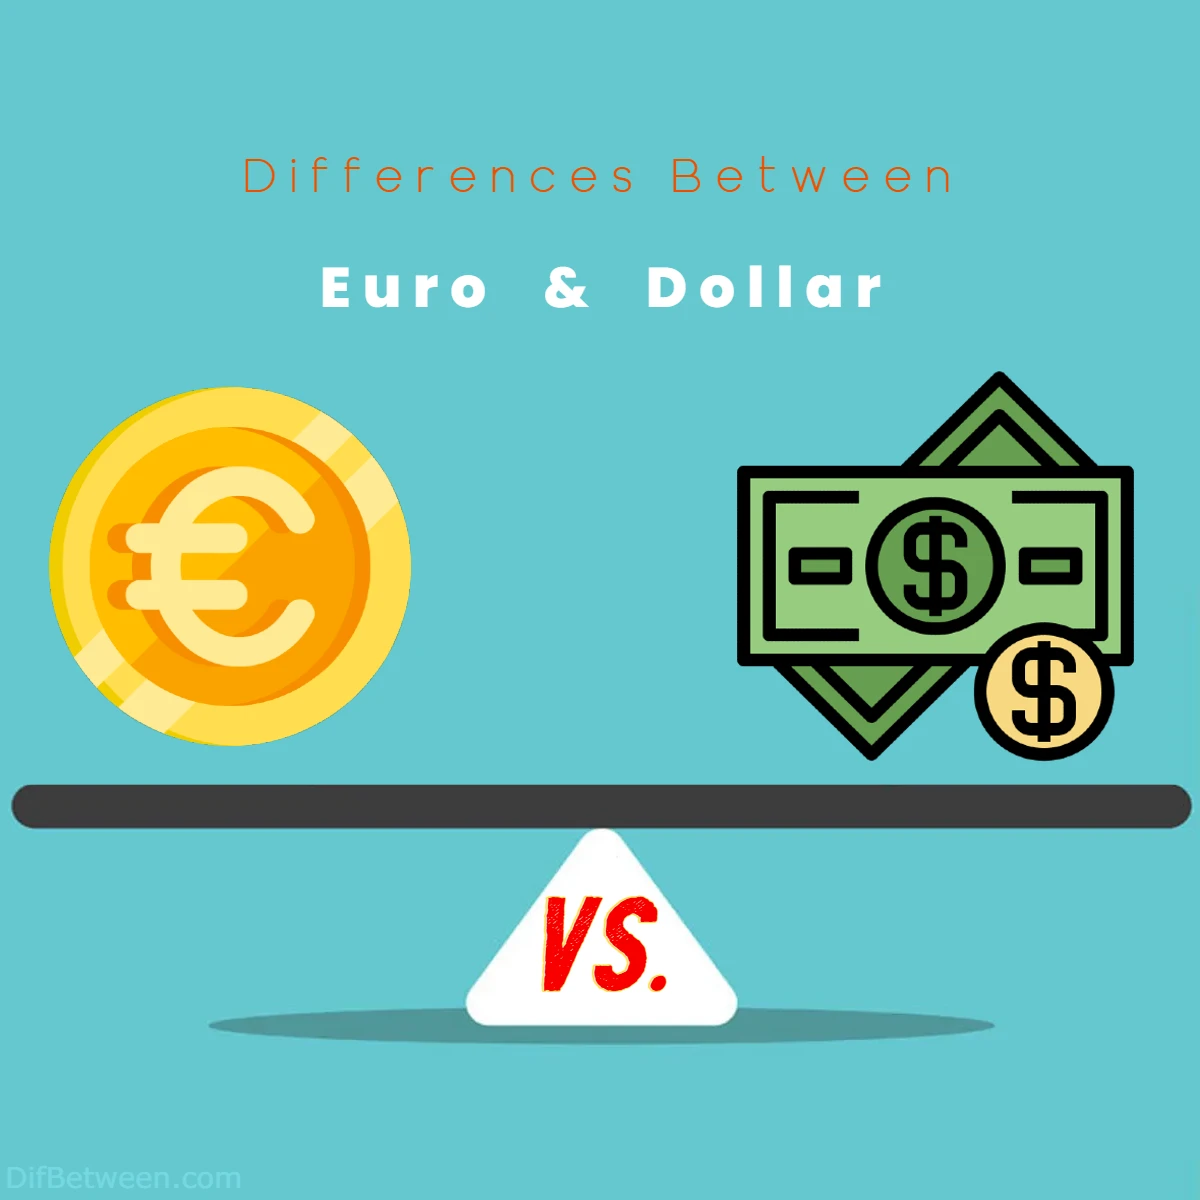 Differences Between Euro vs Dollar